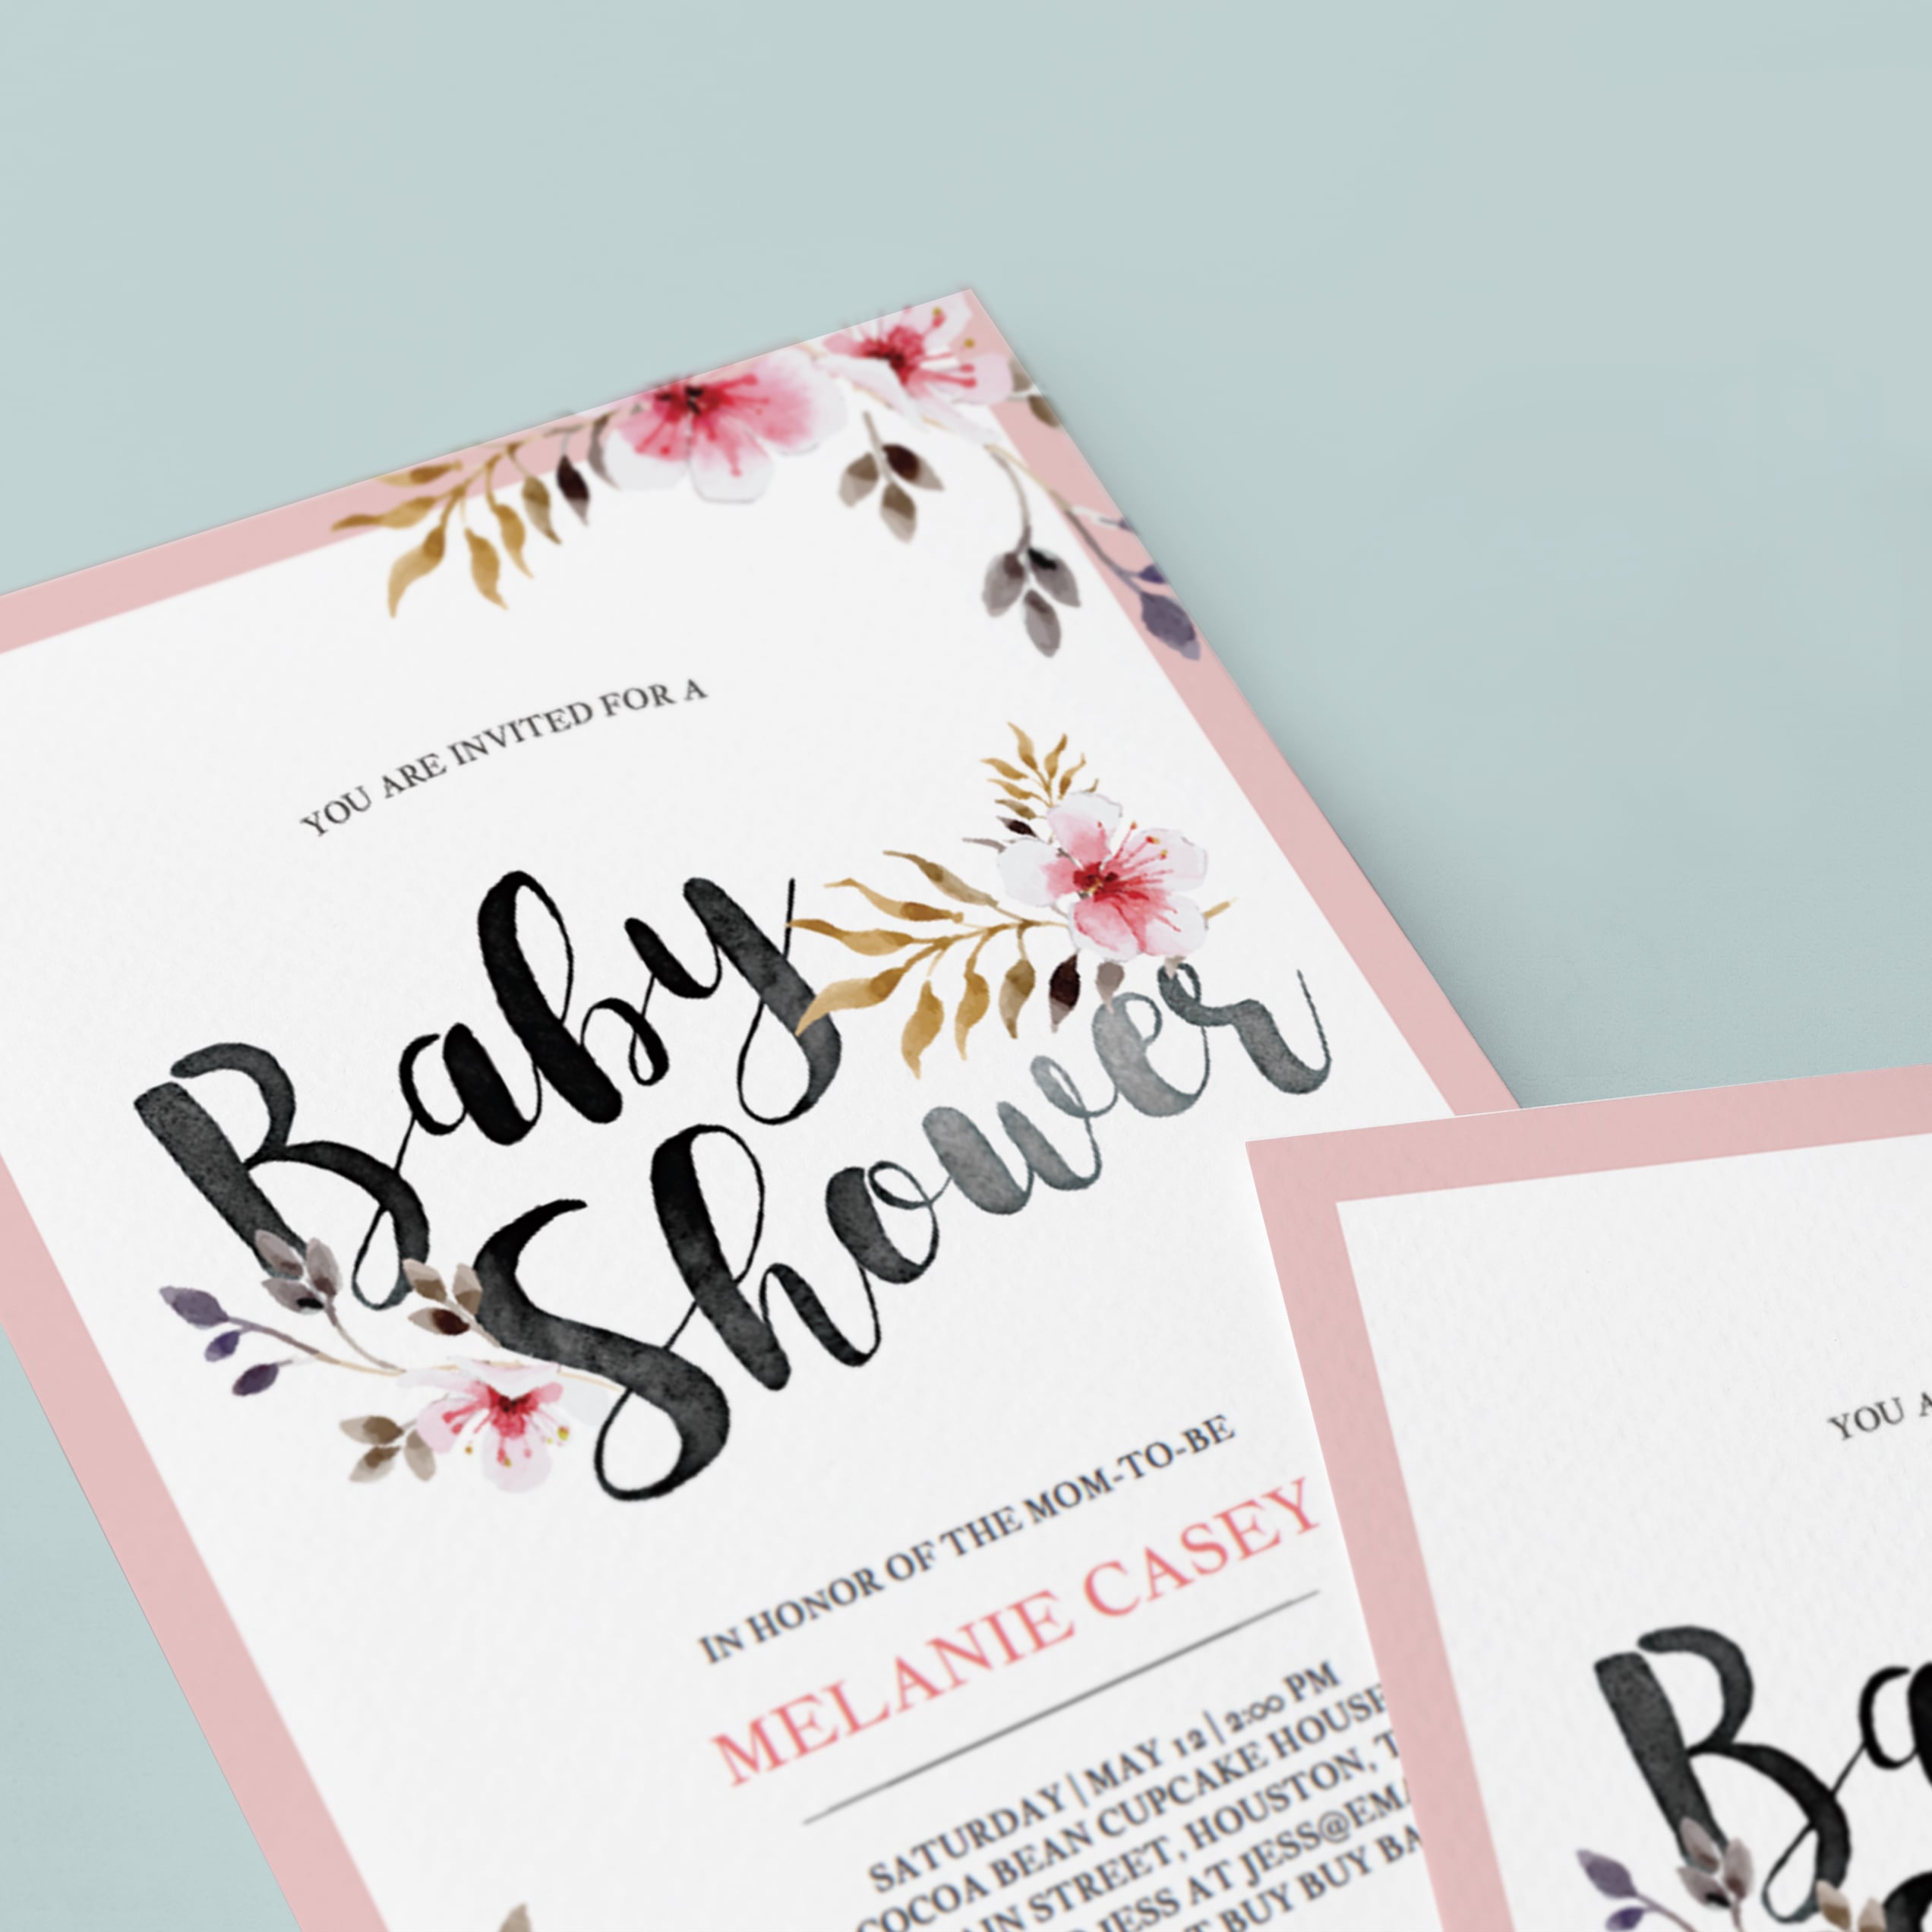 Blush watercolor flowers on baby shower template by LittleSizzle